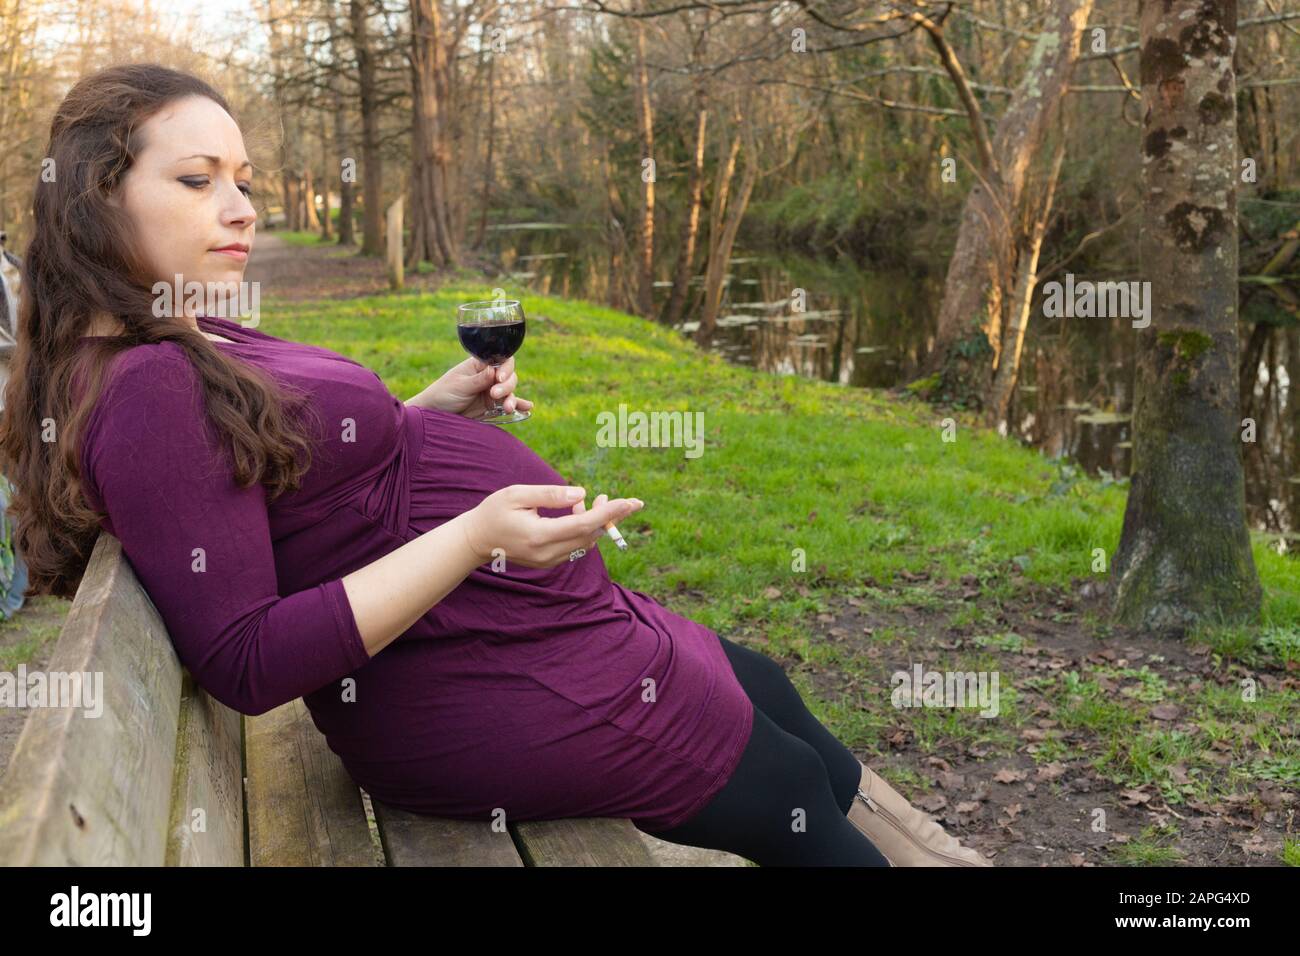 Pregnant woman with alcohol and cigarette in her hands, sitting on the bench in park . Side portrait with copy space Stock Photo